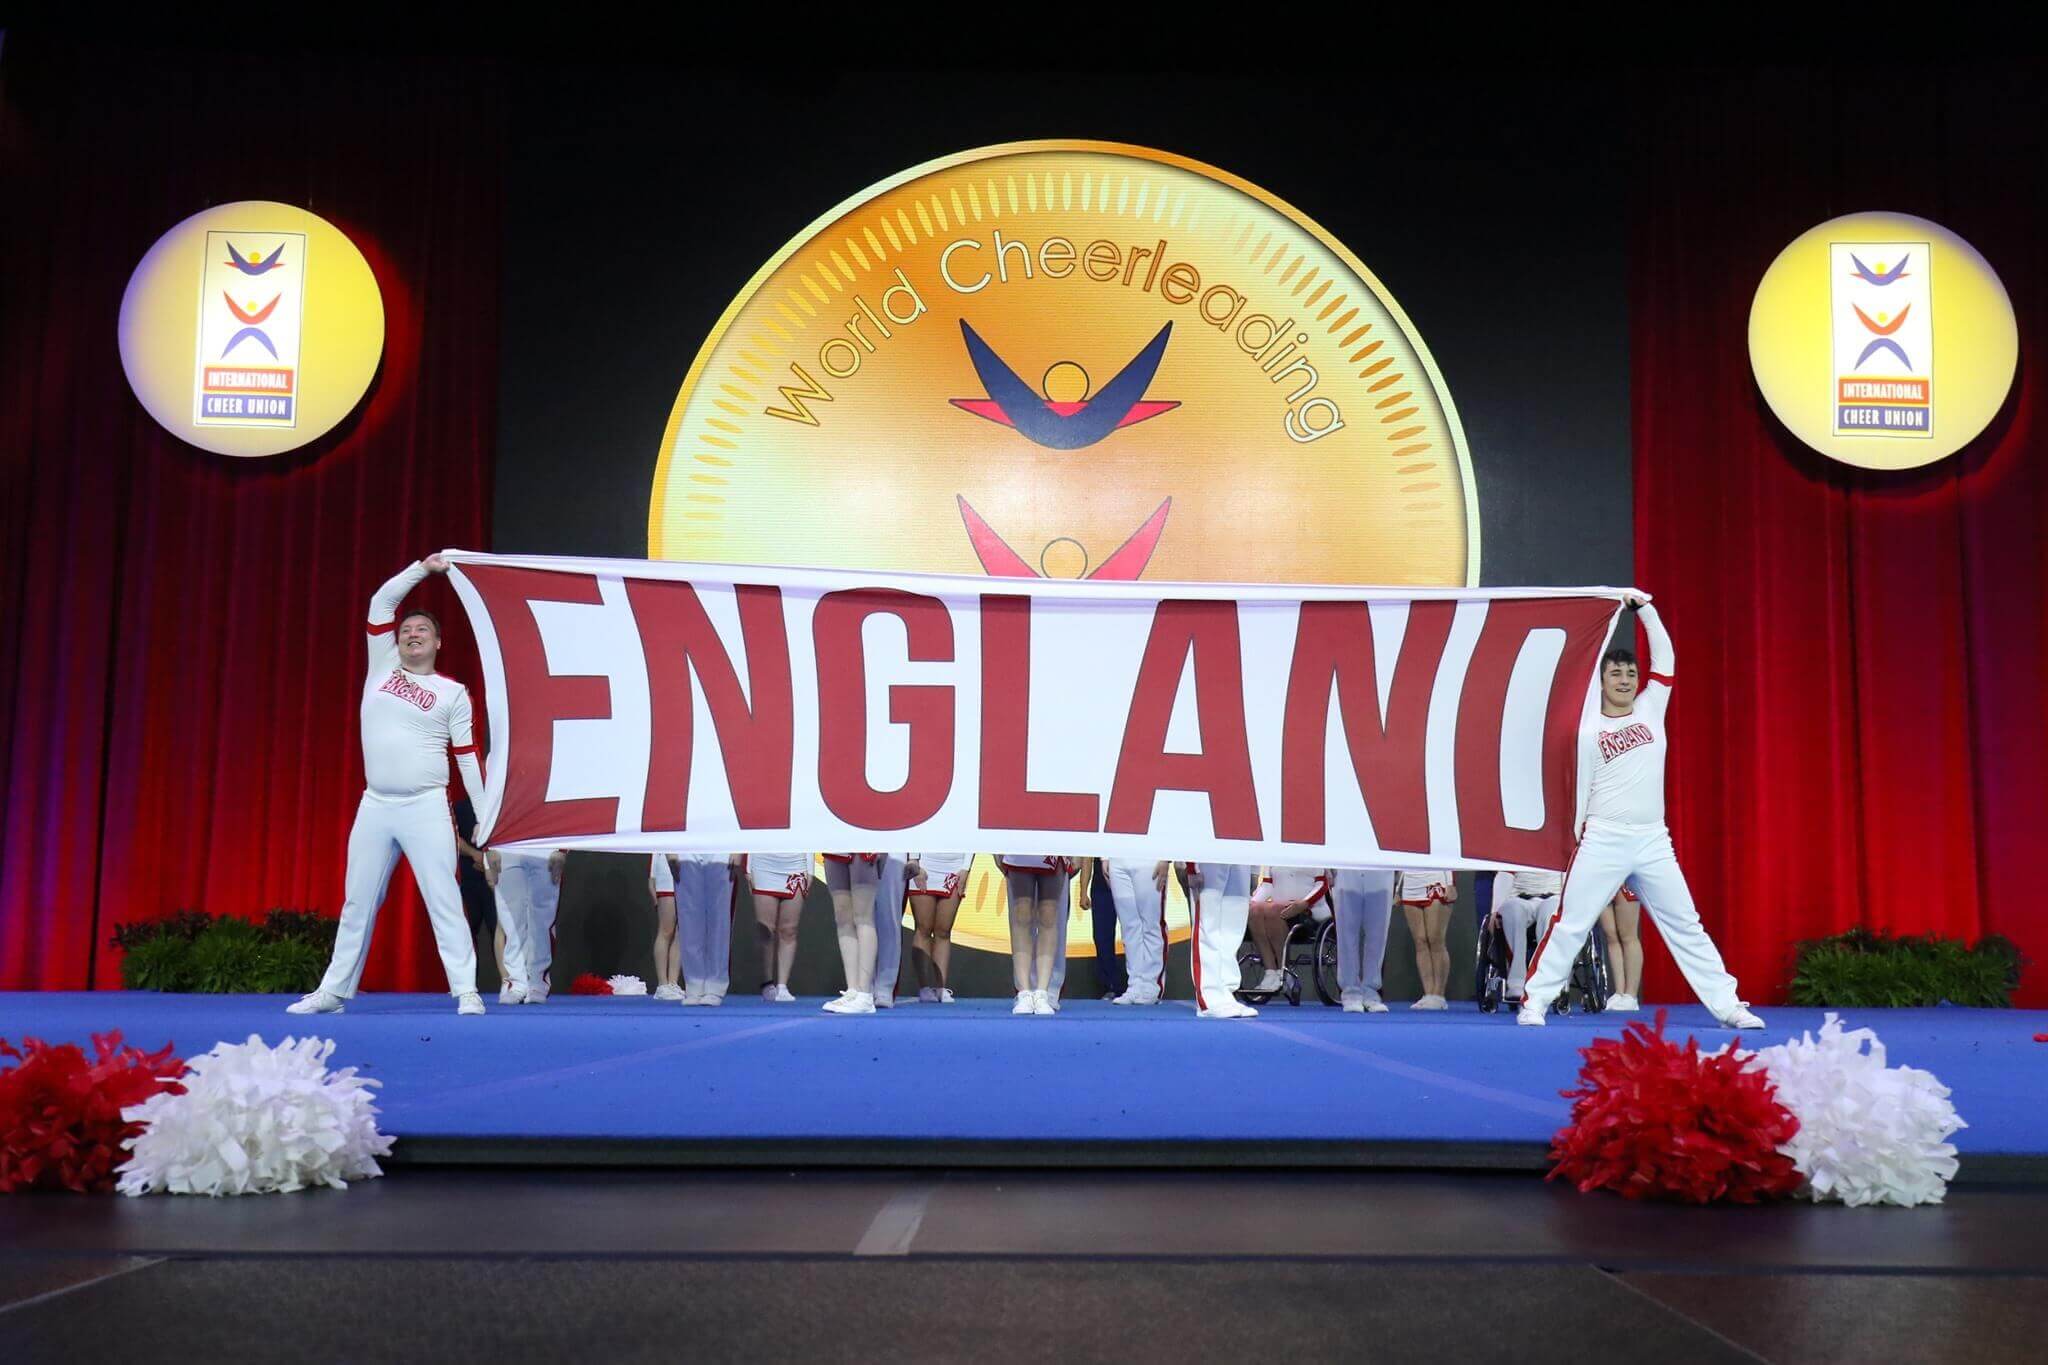 SportCheer England to use technology as foundation to gain Sport England recognition